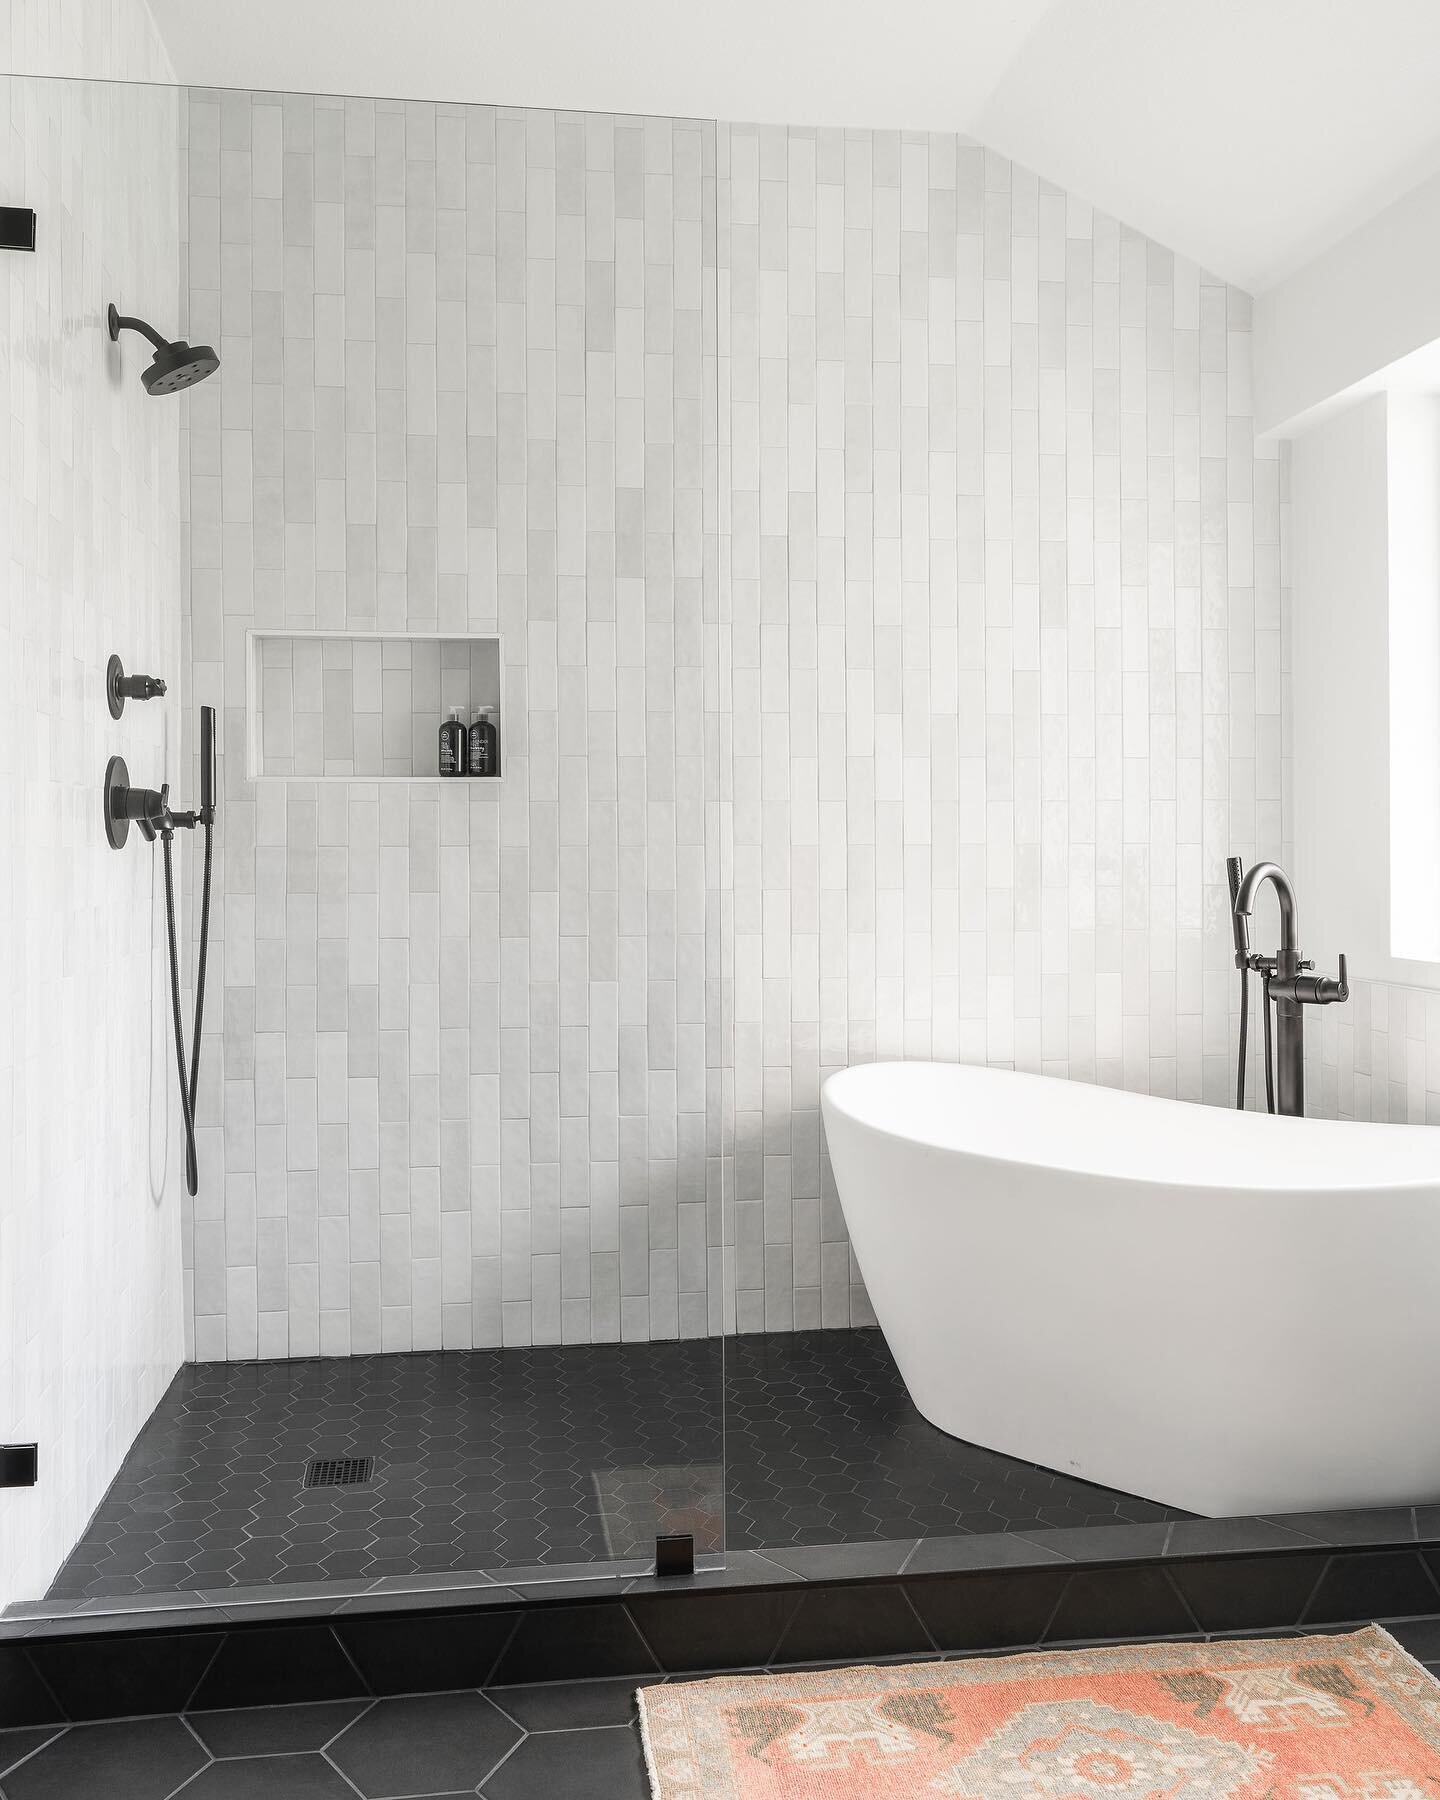 Hello transformation! ✨ 
.
From beige walls, carpet and a chrome framed shower to a bright, complete wet area with a freestanding tub that pops against the continuous black hex floor, and those gorgeous floor-to-ceiling zellige tiles that draw your e